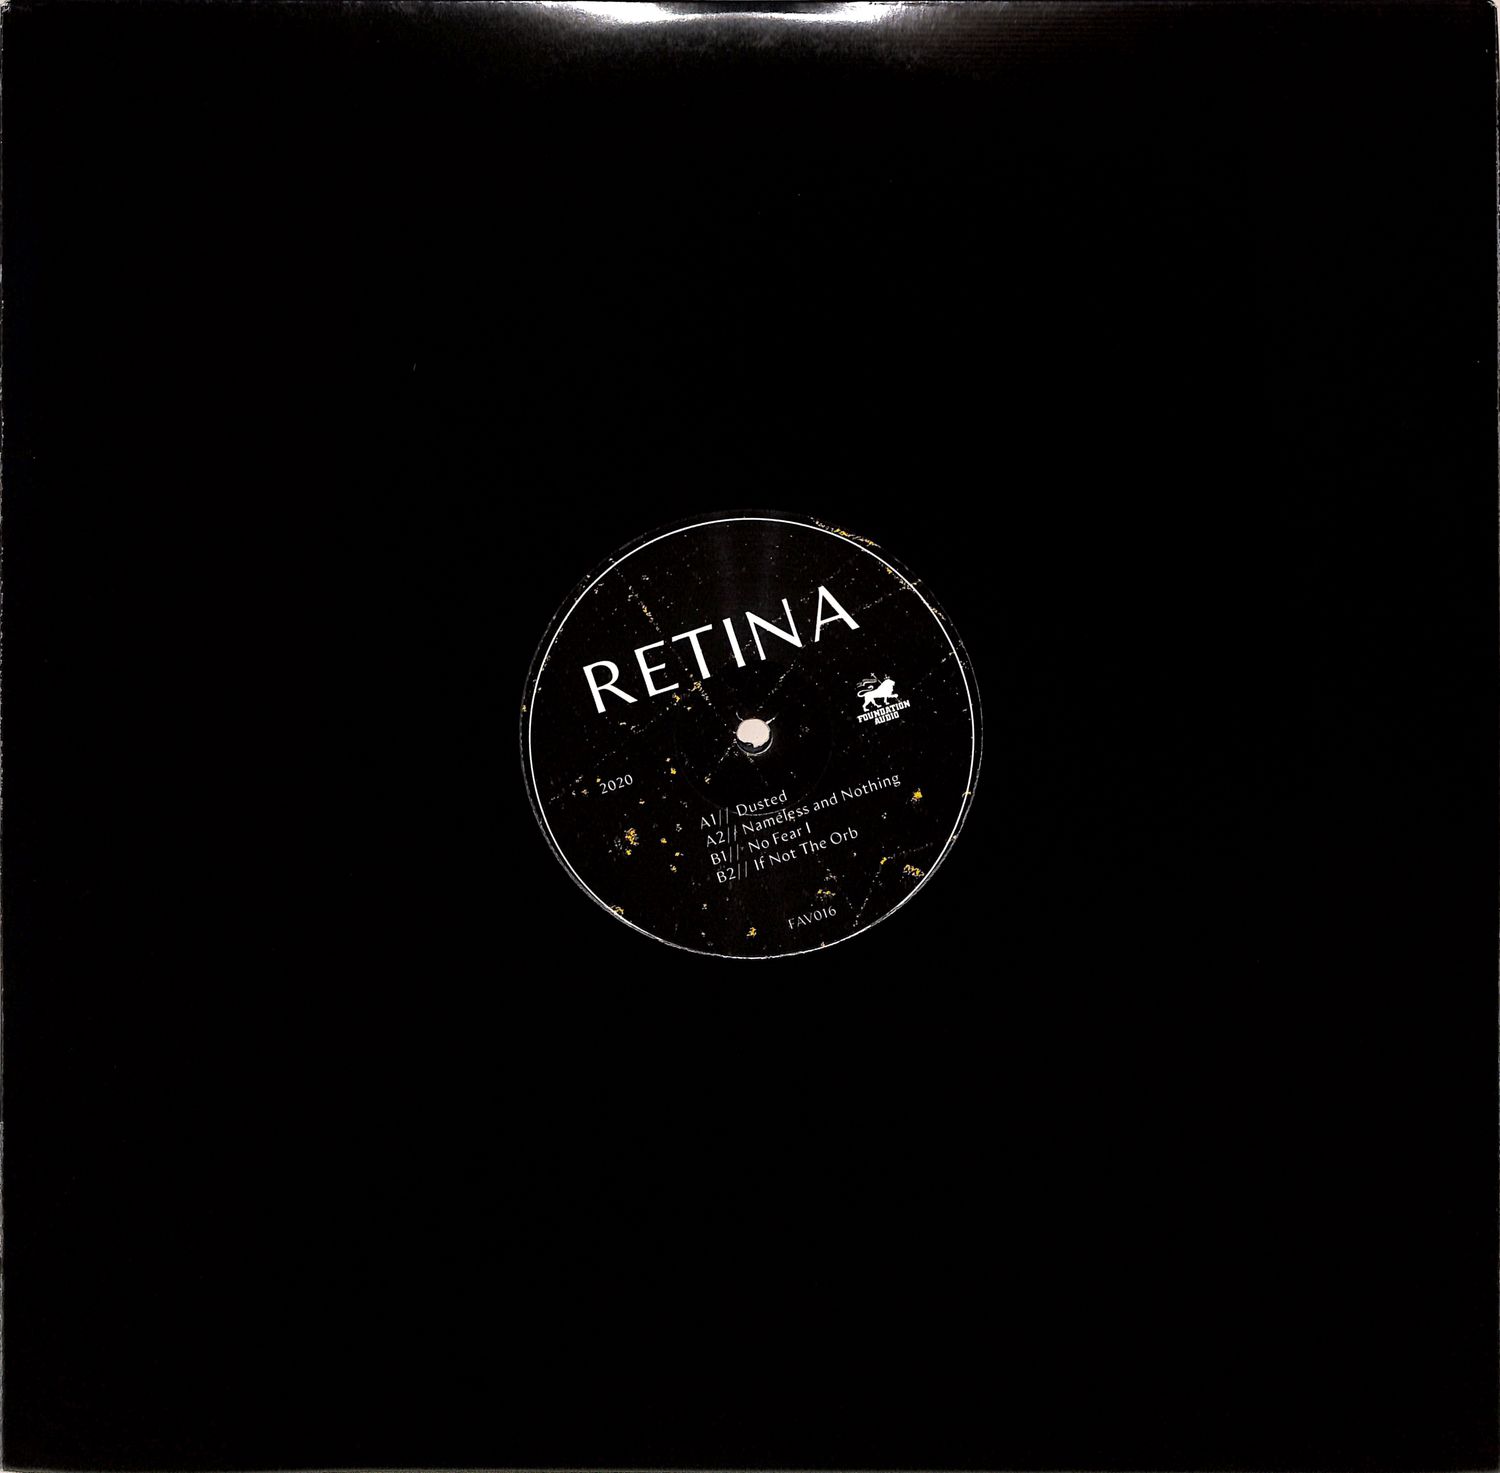 Retina - DUSTED EP